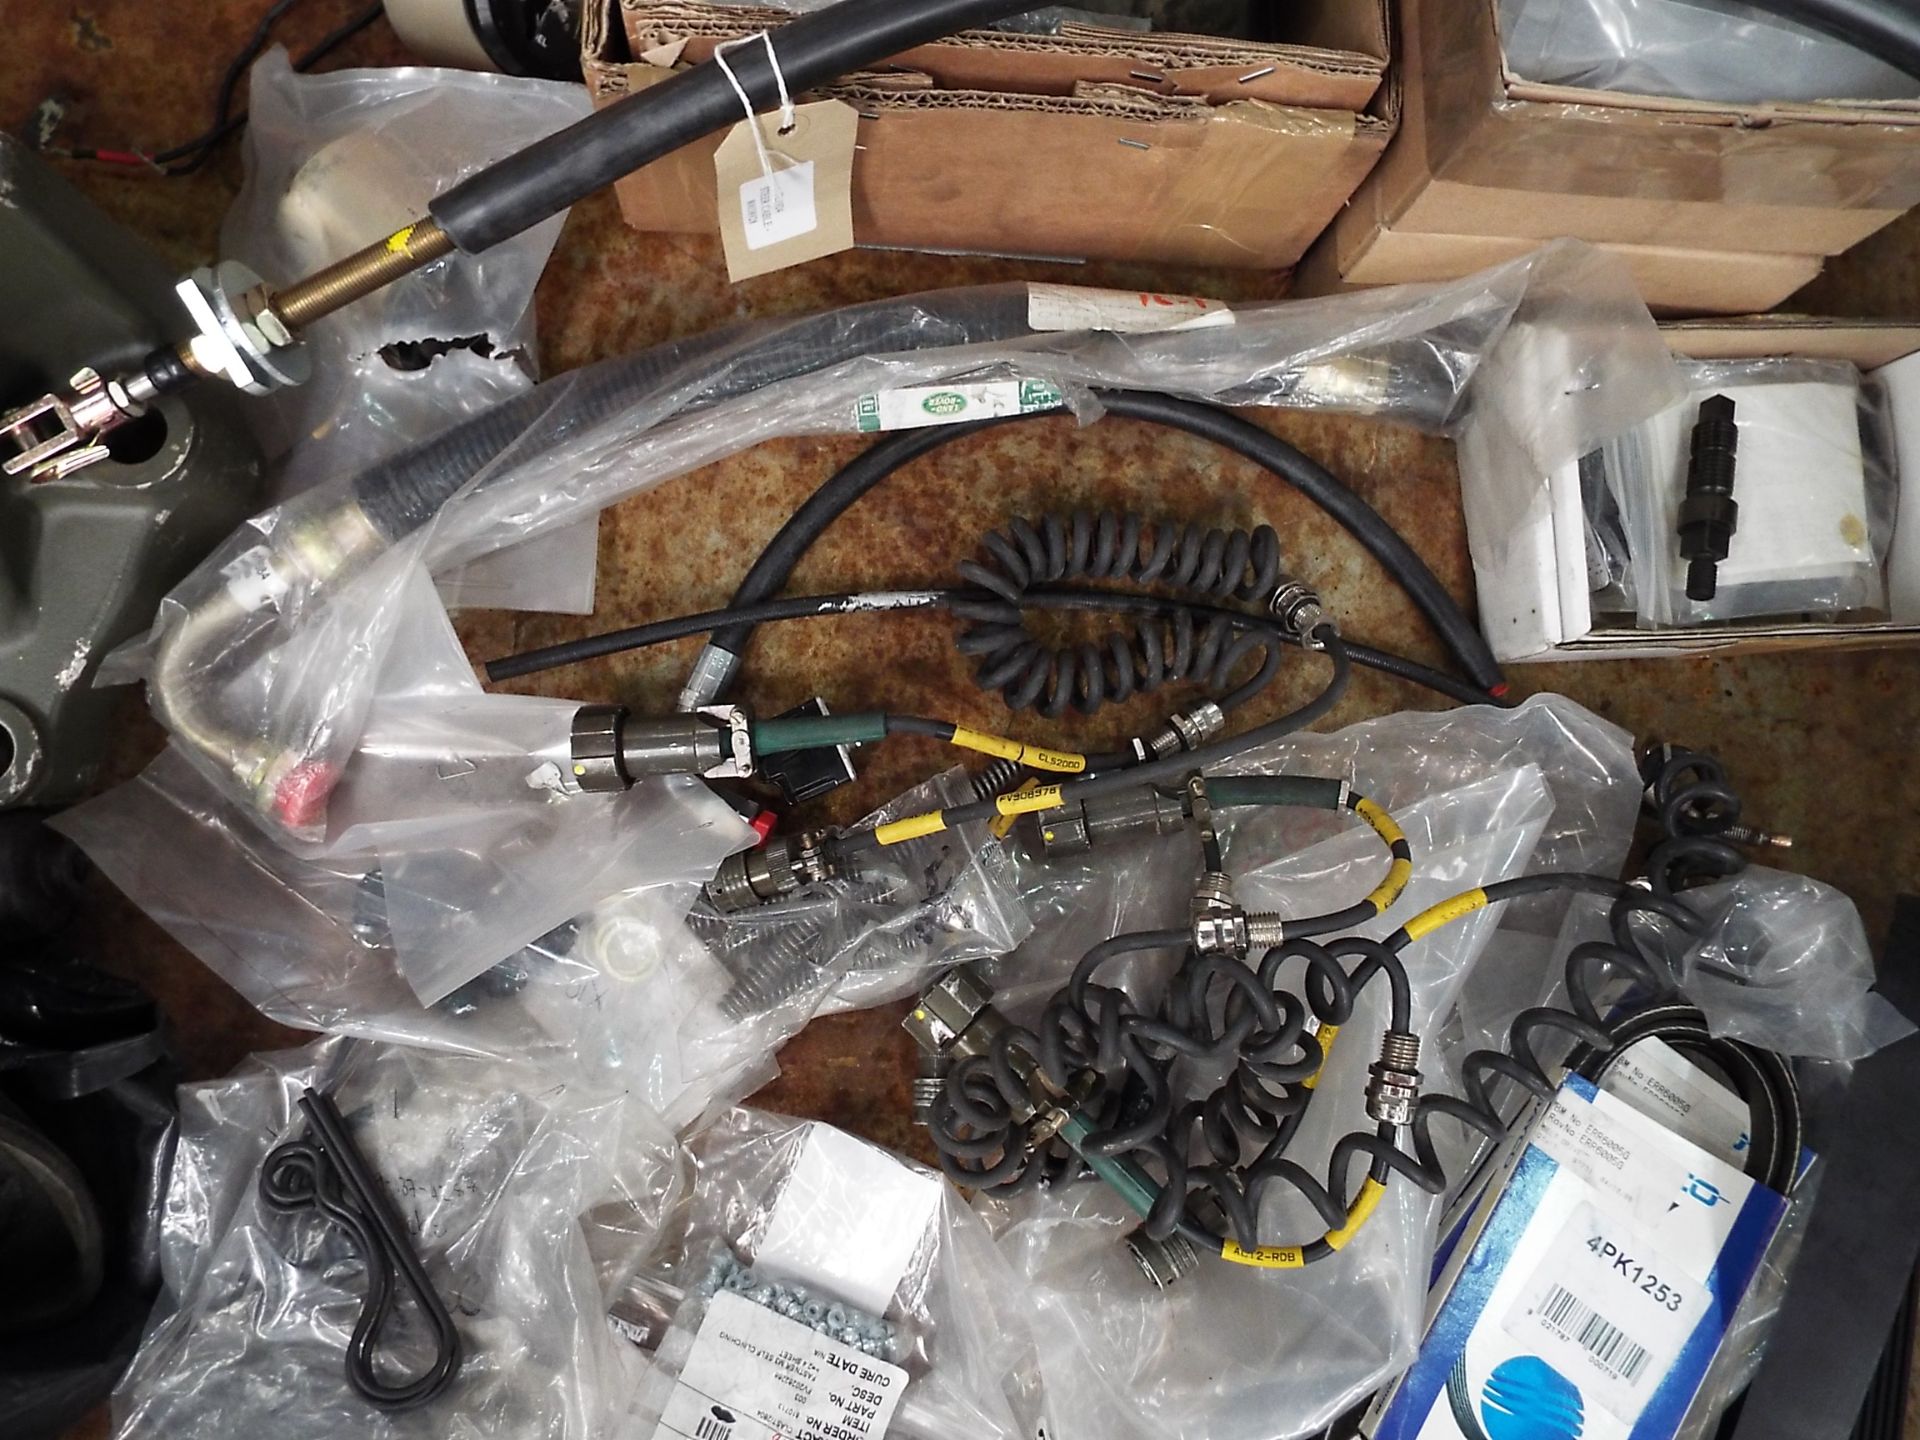 Mixed Stillage of Fighting Vehicle and Wolf Spares inc Wiring Harness', Clips, Fan, Belts etc - Bild 6 aus 9